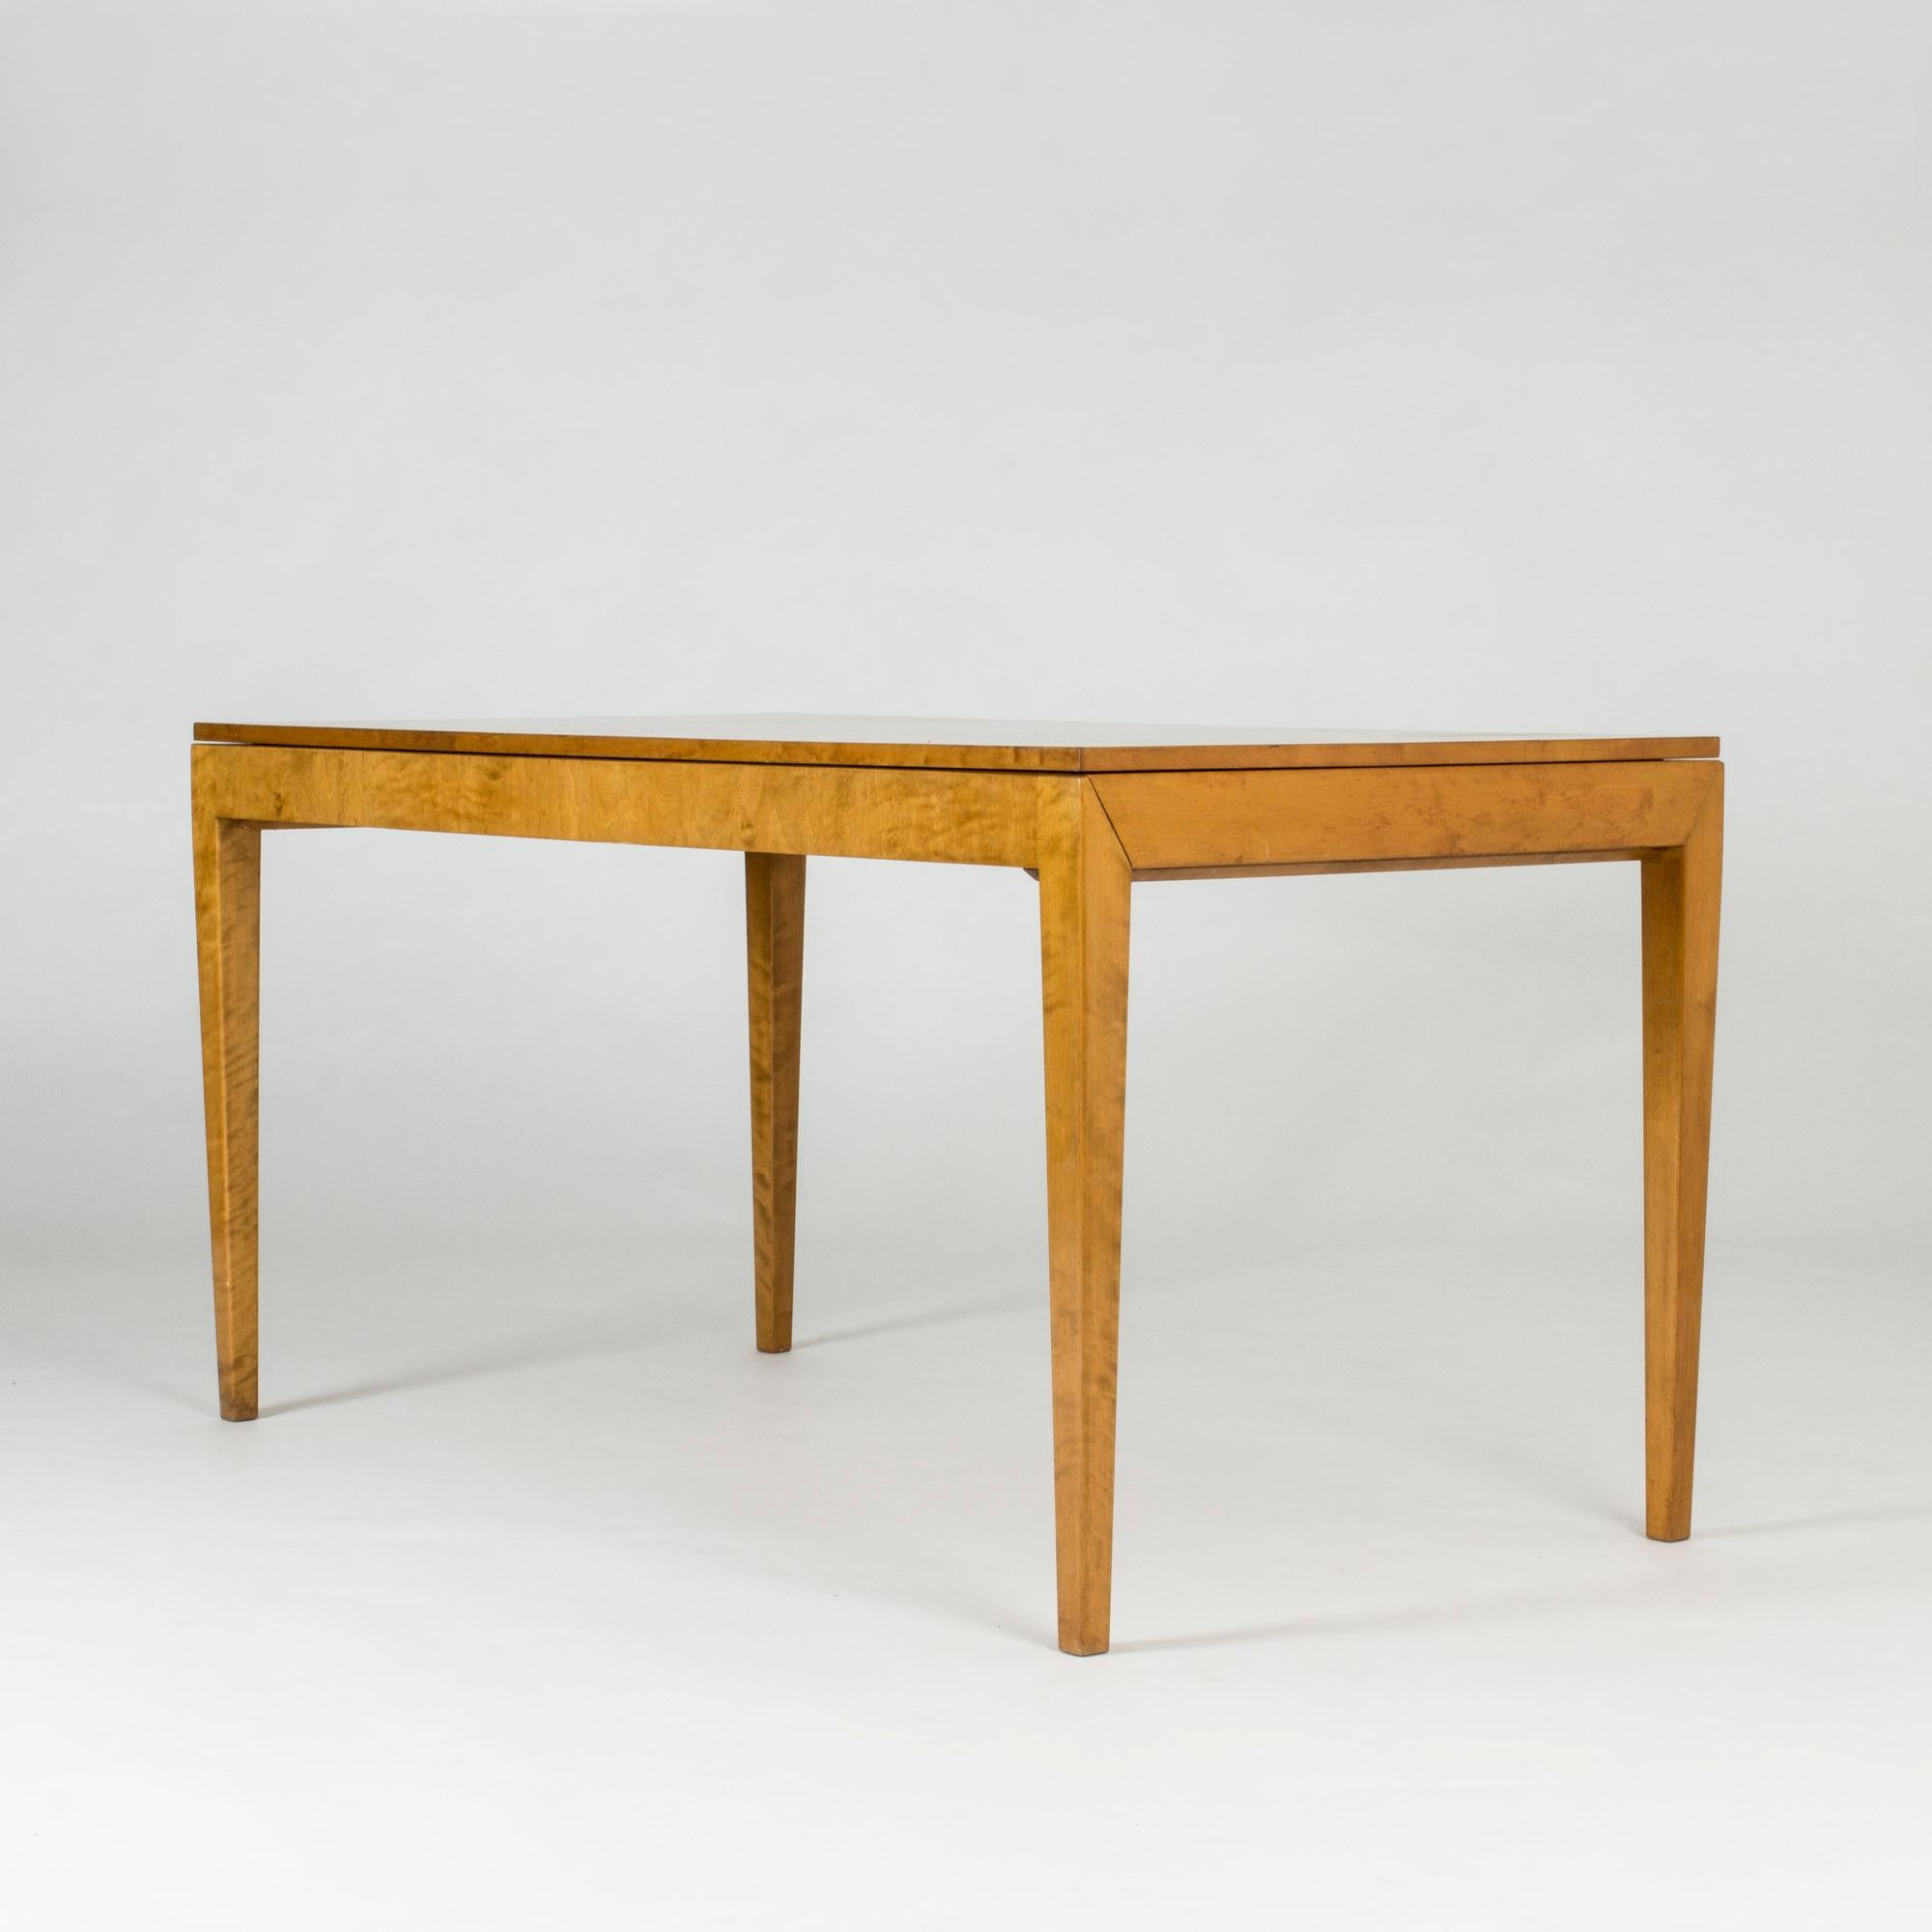 Striking functionalist dining table by Axel Larsson with diagonal joinery at the top of the legs. The table is made from beech with two extension leaves cleverly hidden under the tabletop. Beautiful life in the wood grain.